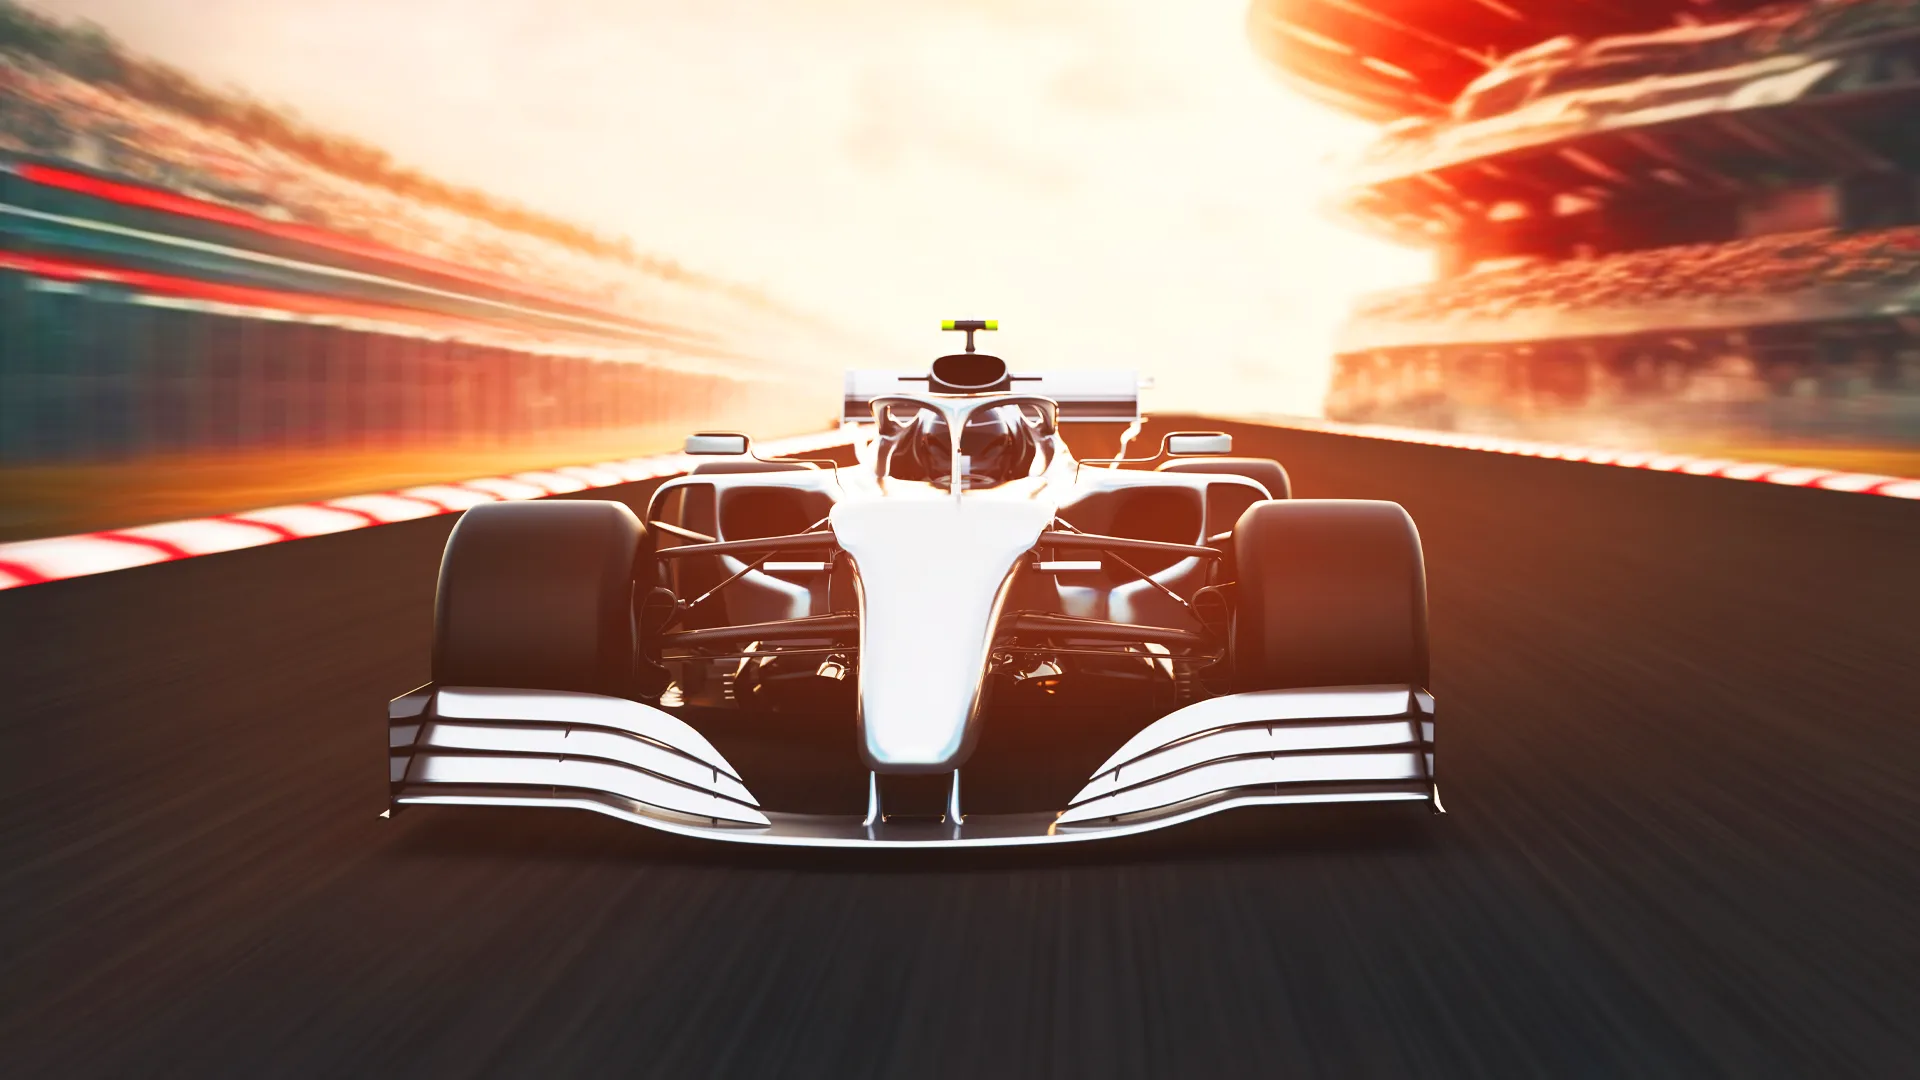 The Parallels Between Formula 1 Cars and Parallel File Systems